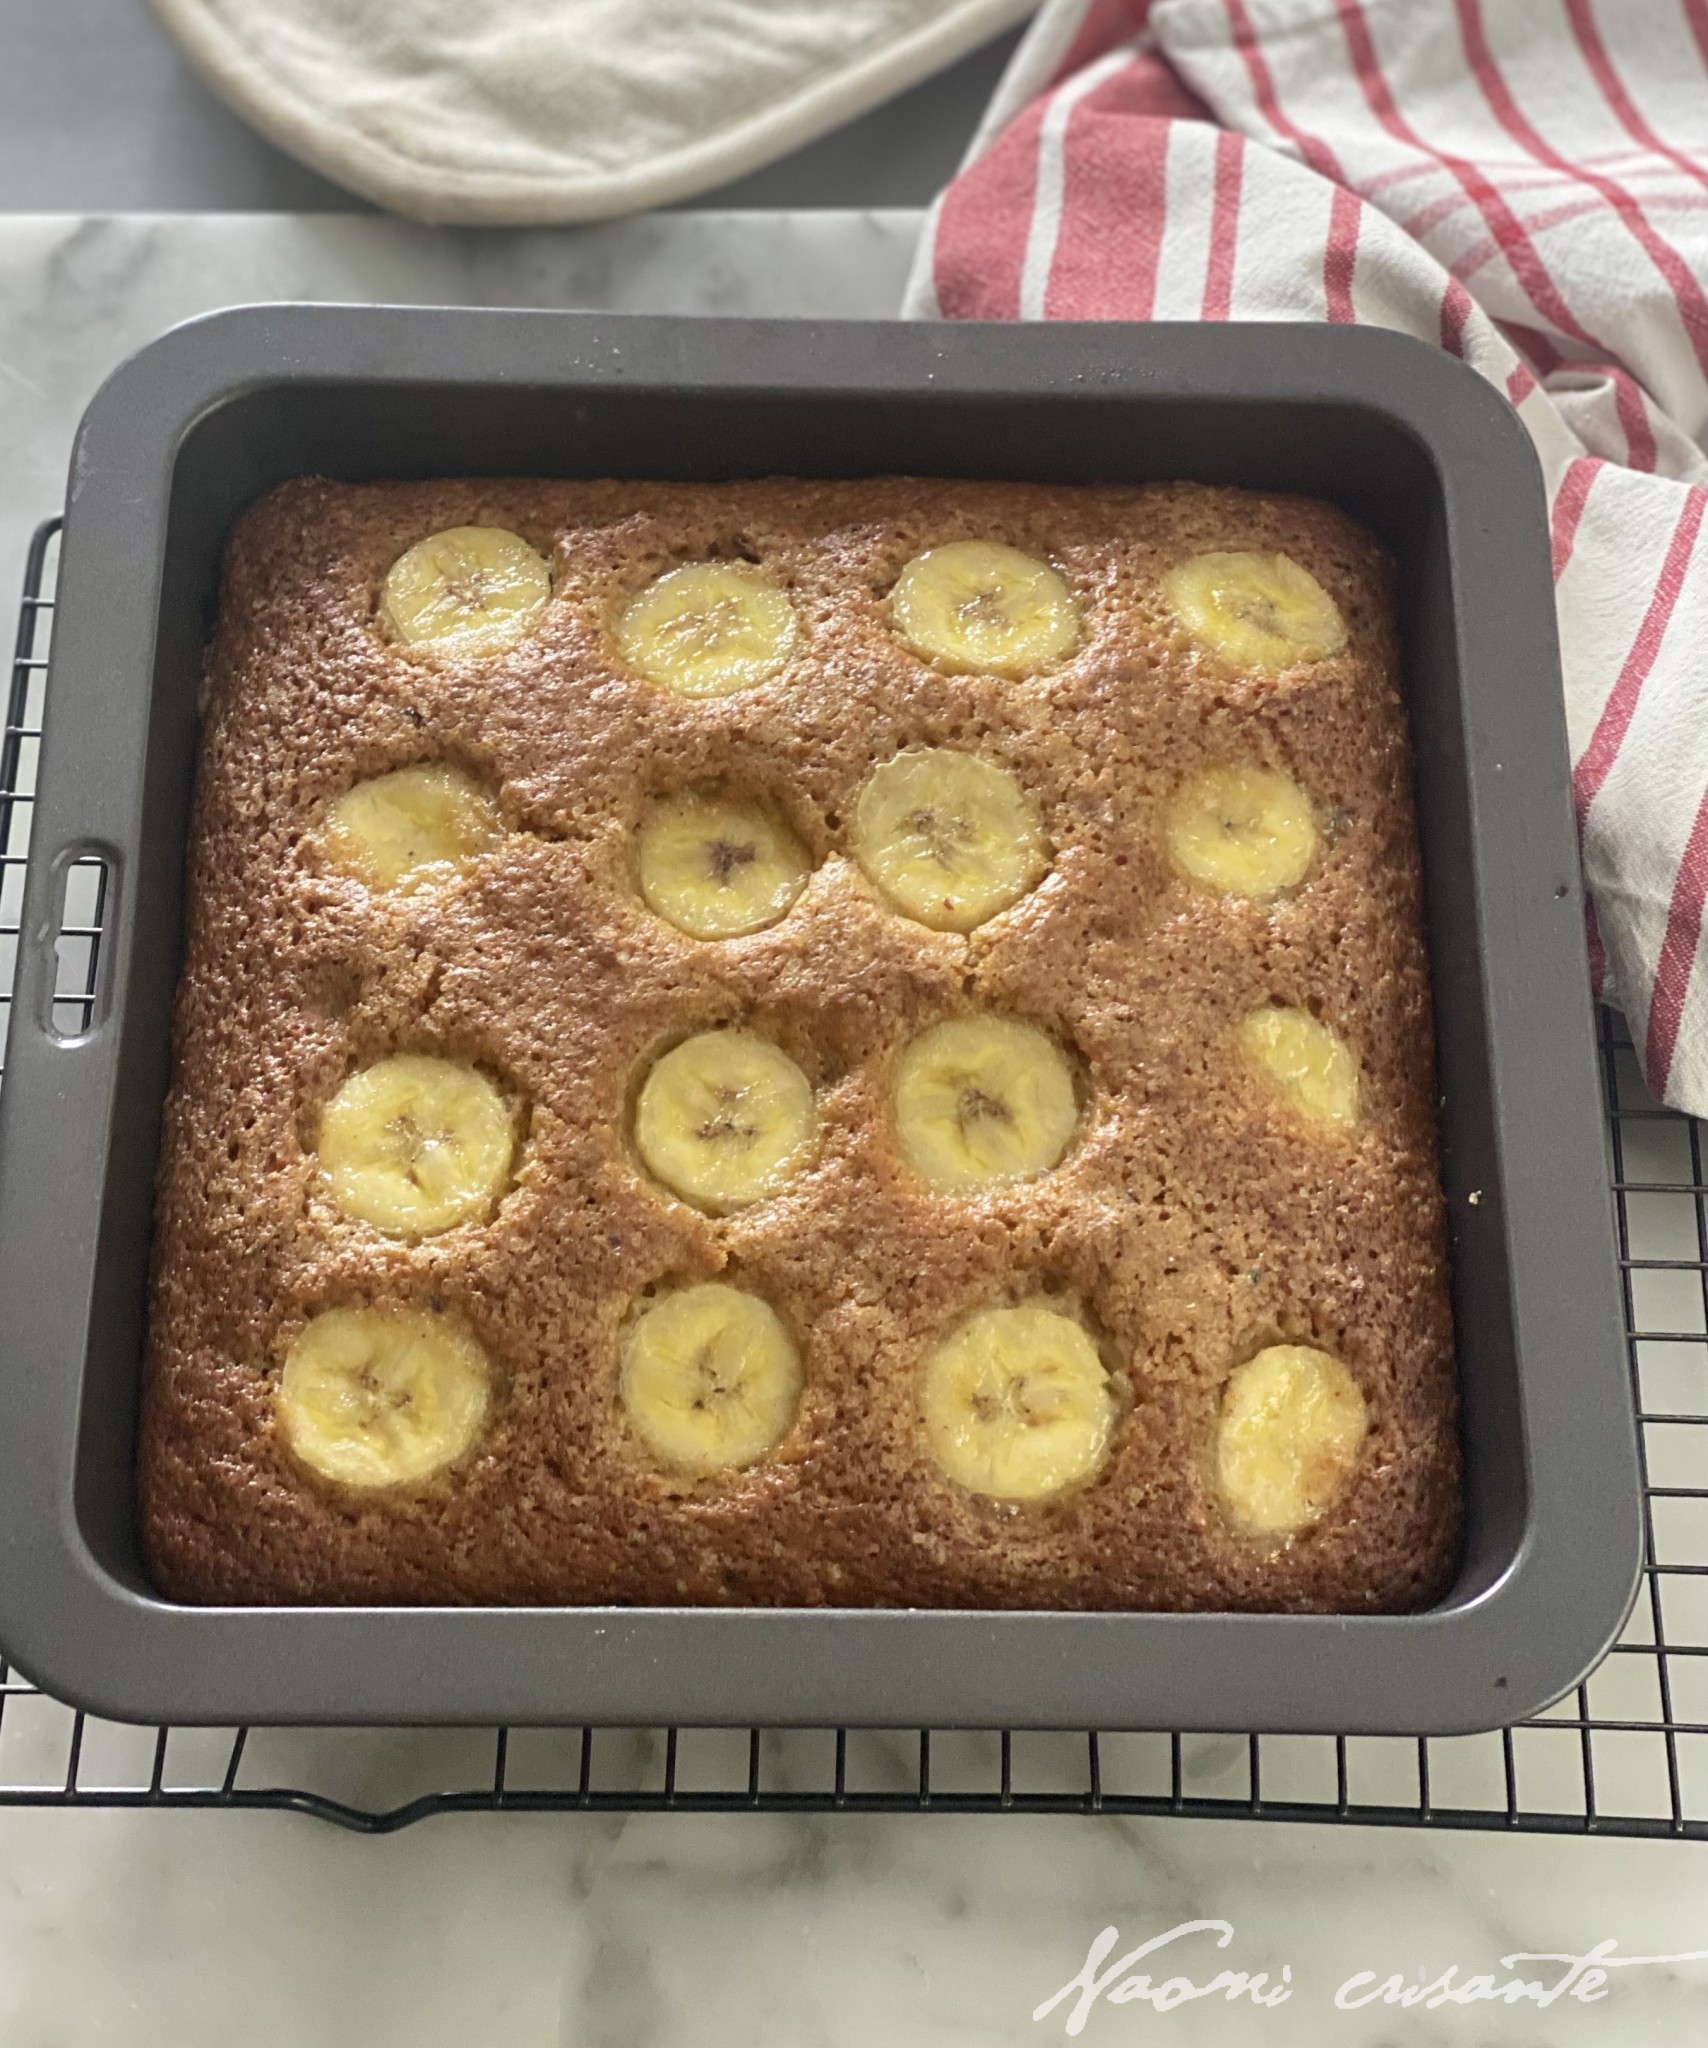 Banana Date Cake With Lotus Biscuit Topping - Culinary Nirvana